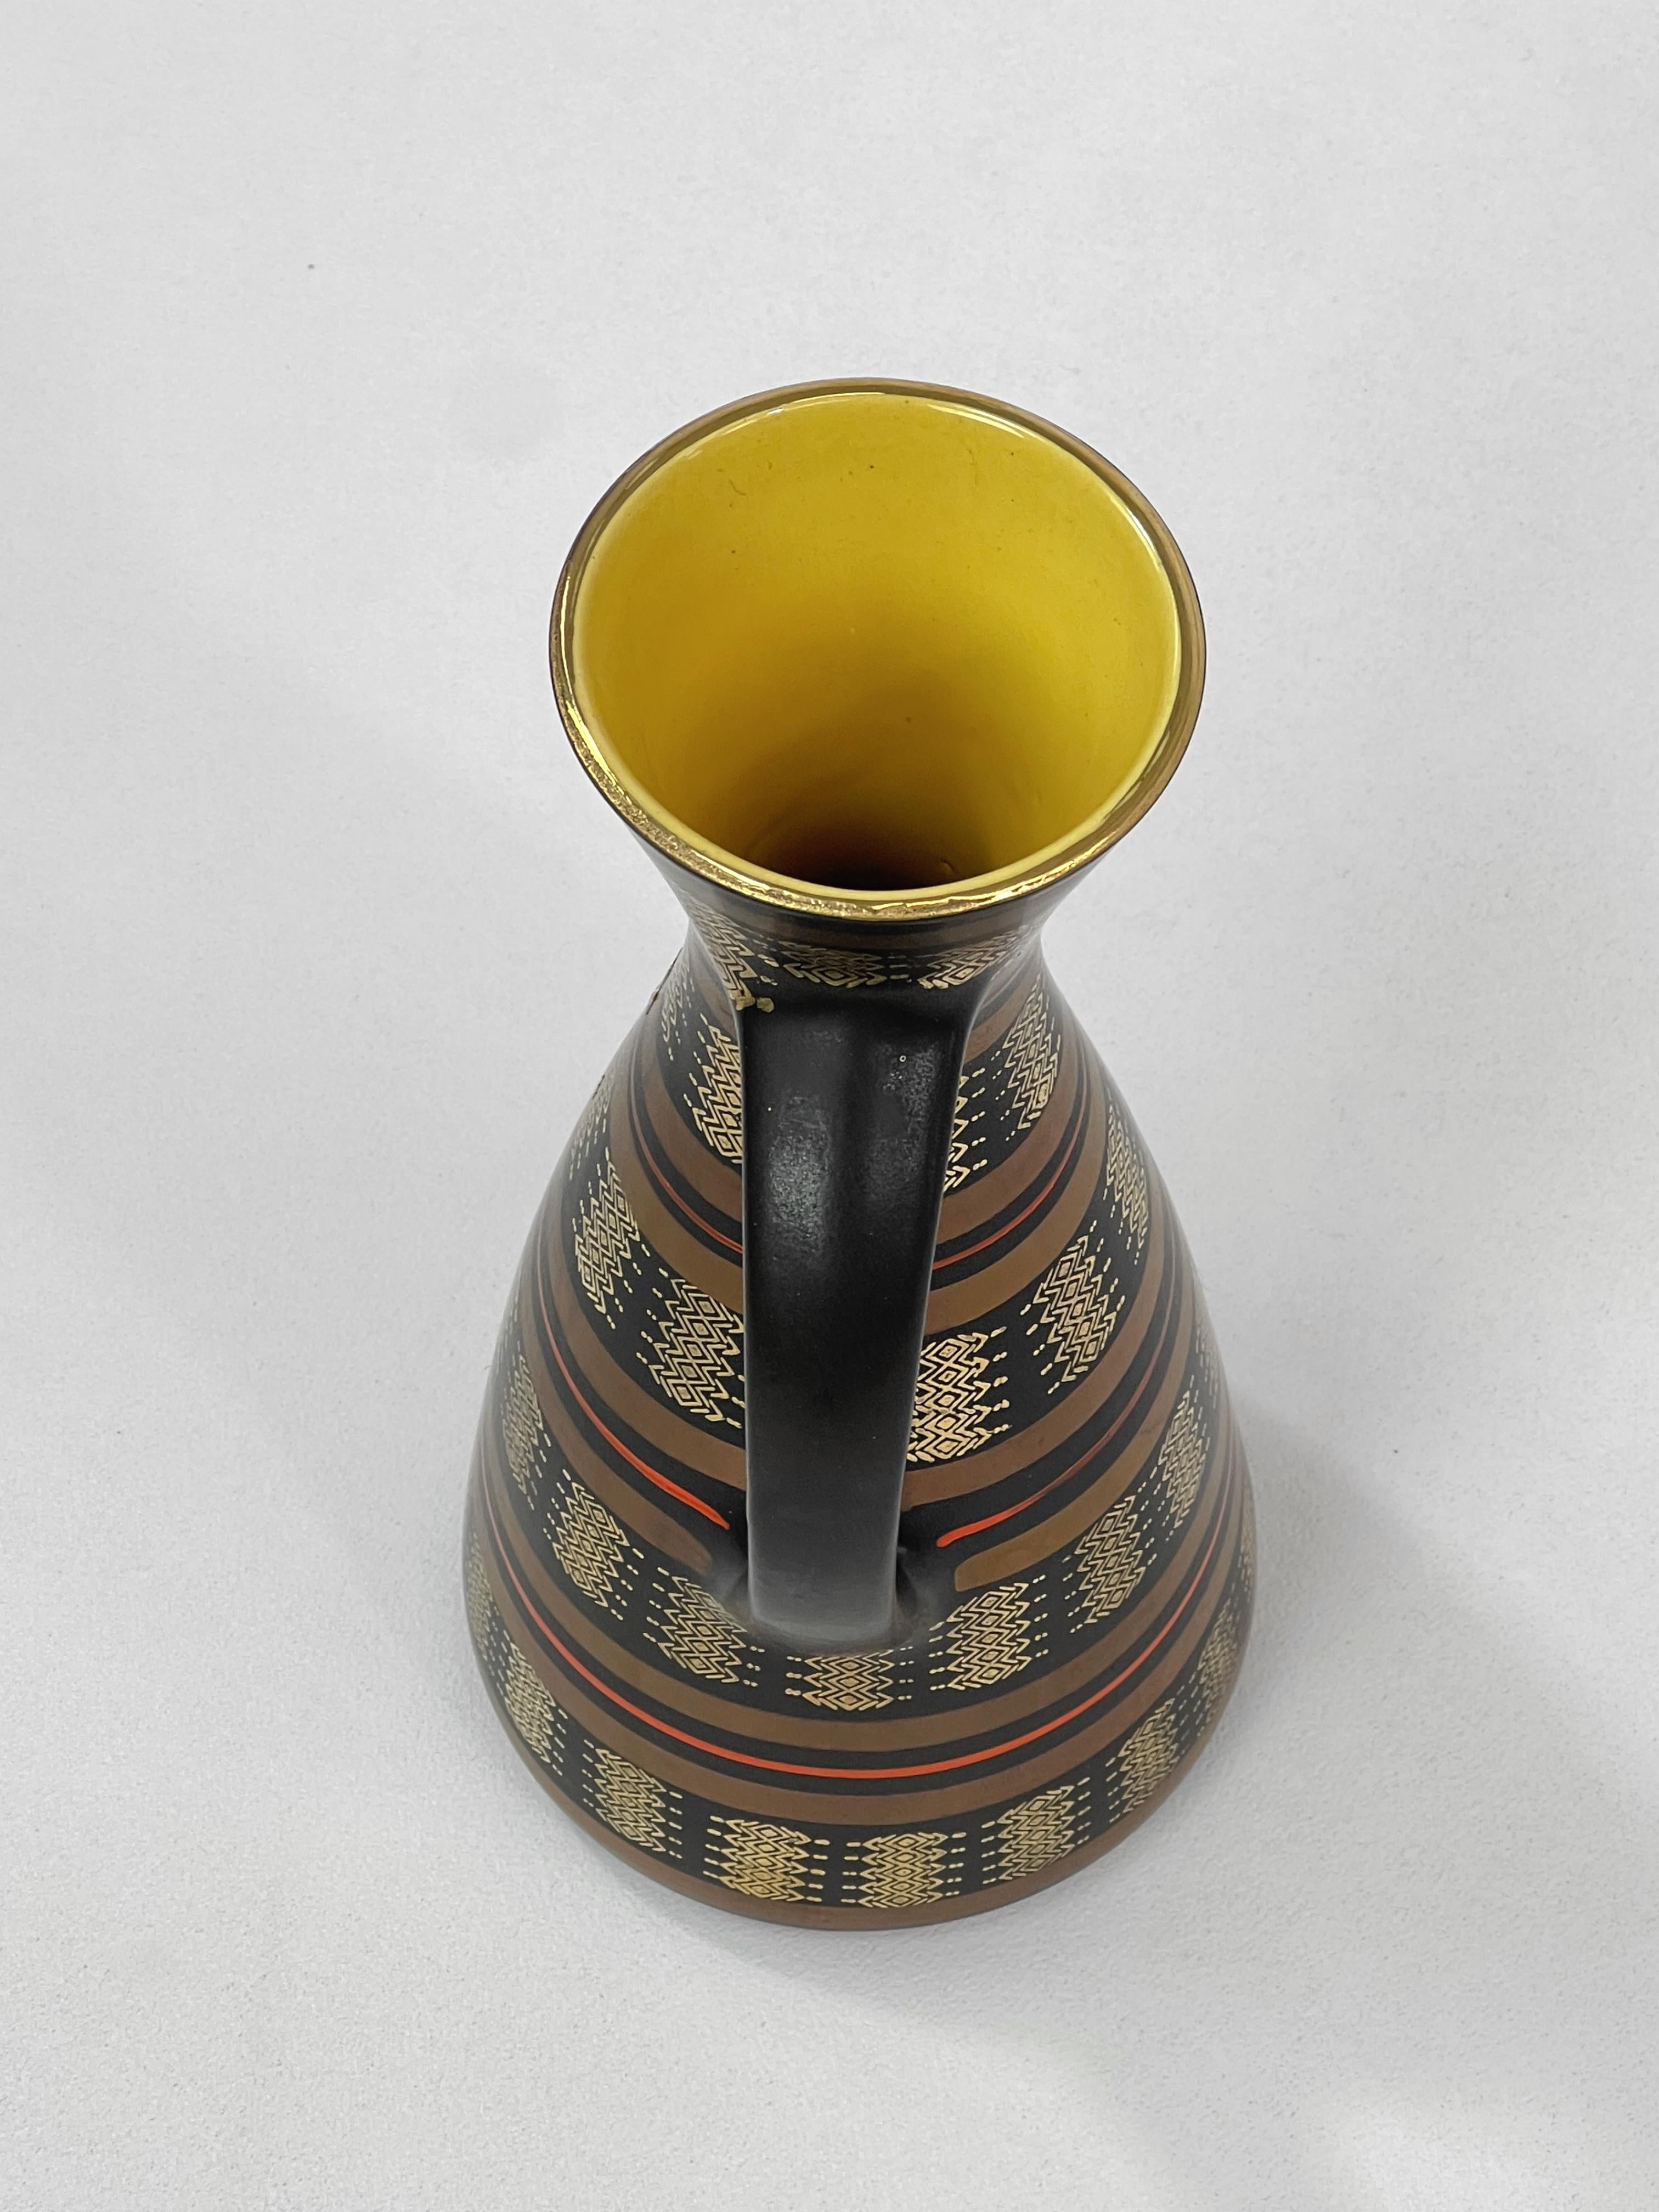 1960s West Germany Handmade Ceramic Vase Copper And Gold Color Finishes For Sale 1